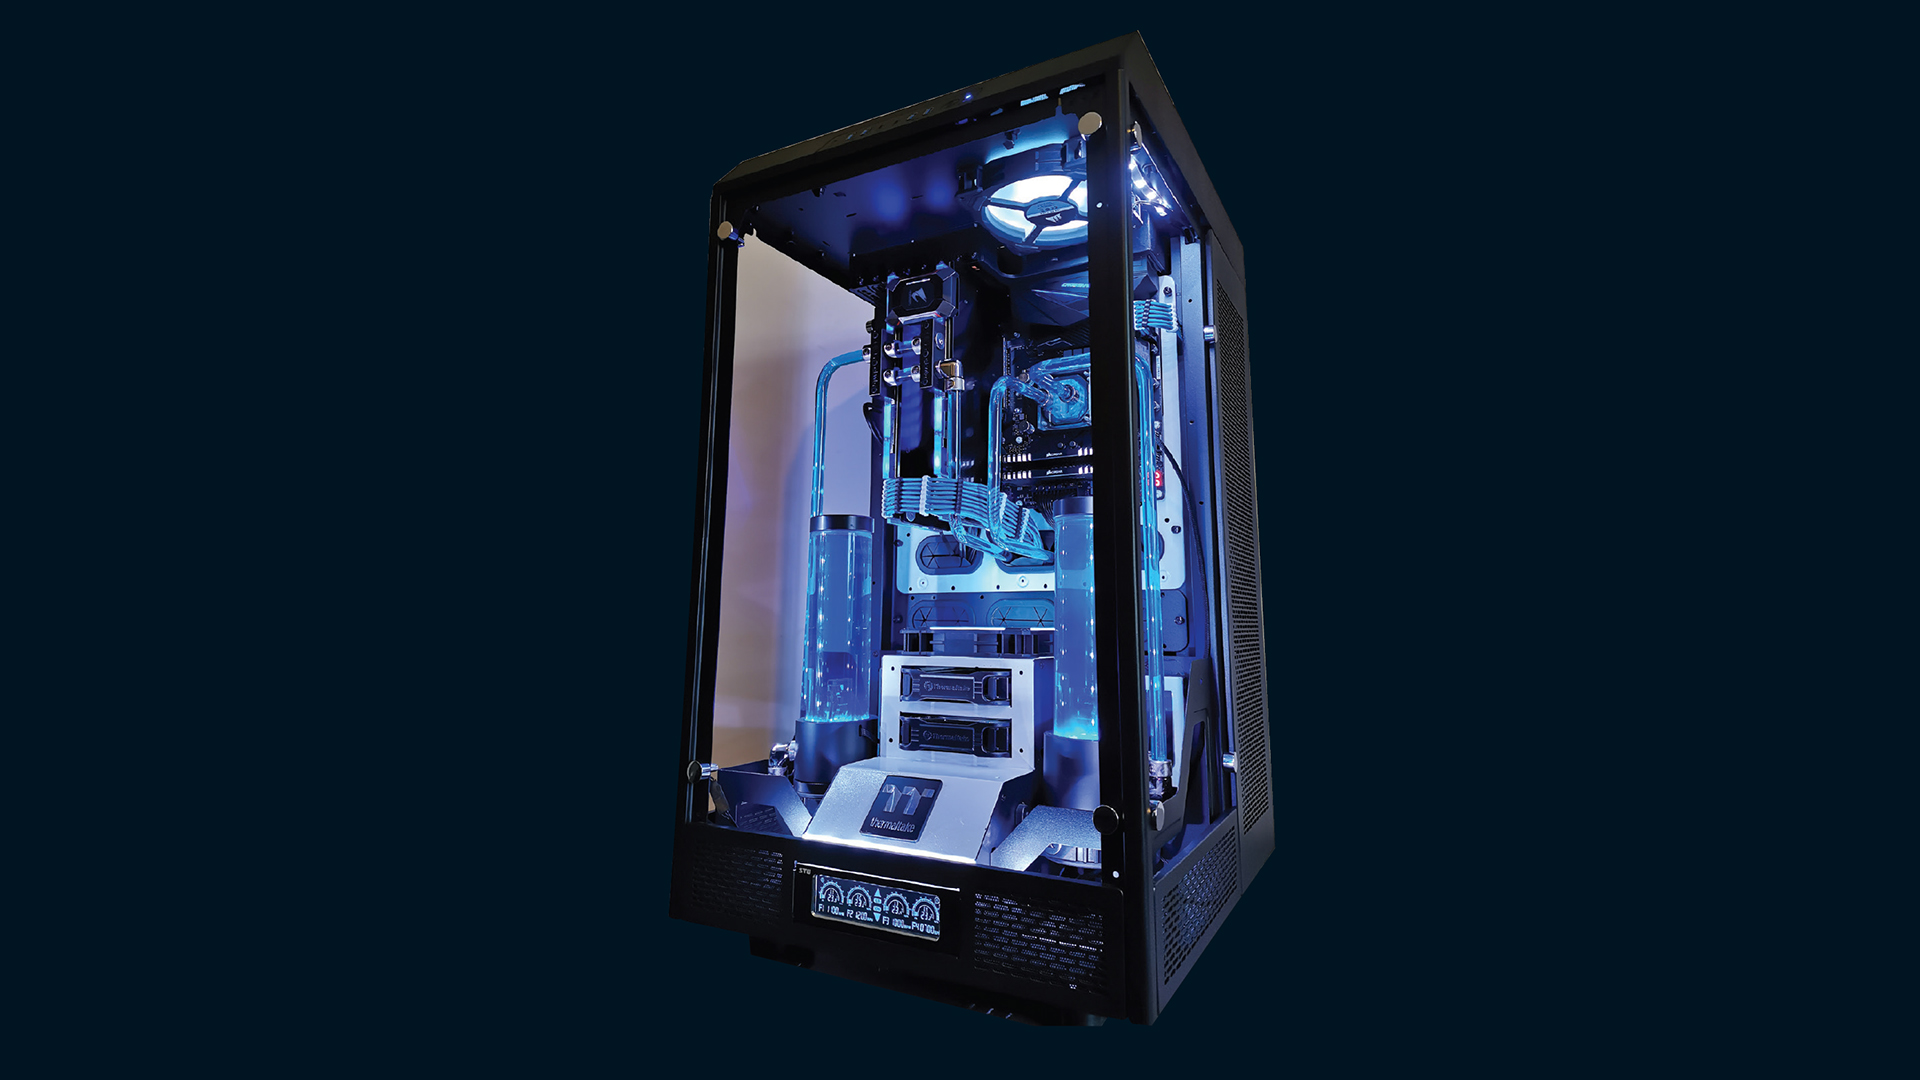 This super clean gaming PC has two water-cooling loops